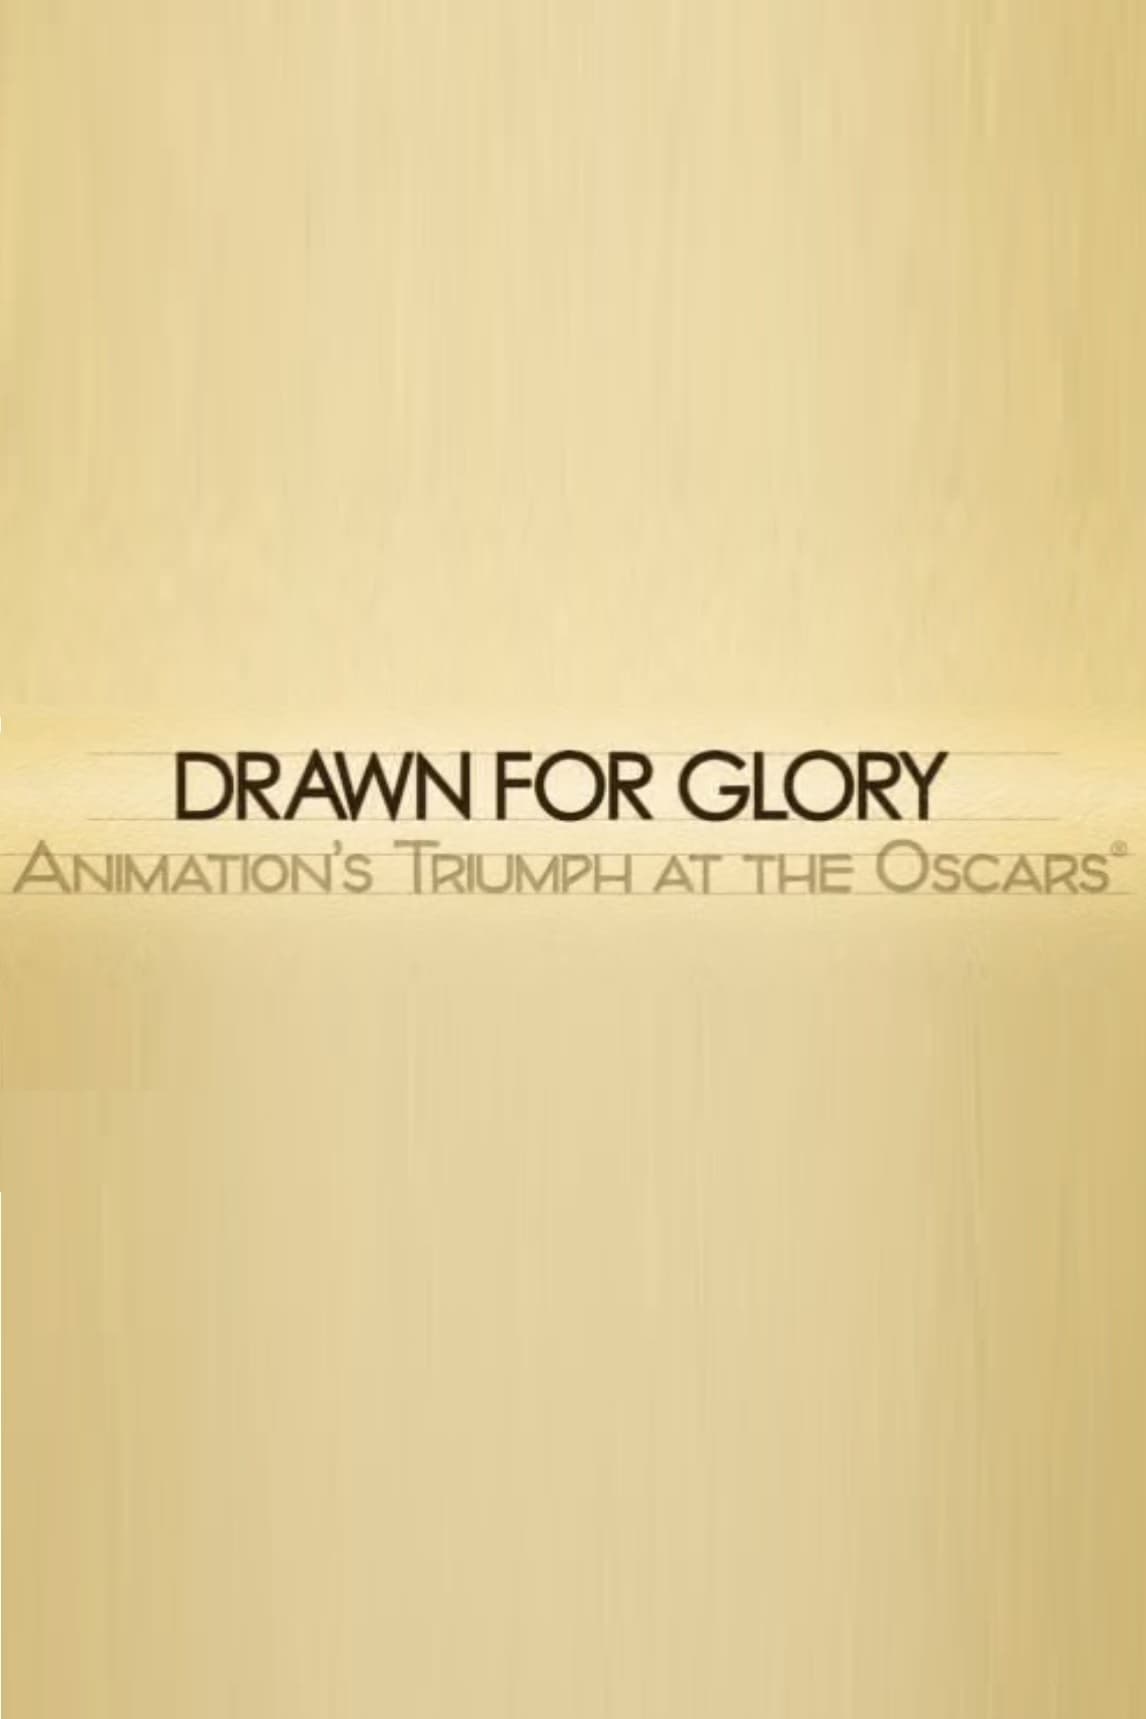 Drawn for Glory: Animation's Triumph at the Oscars